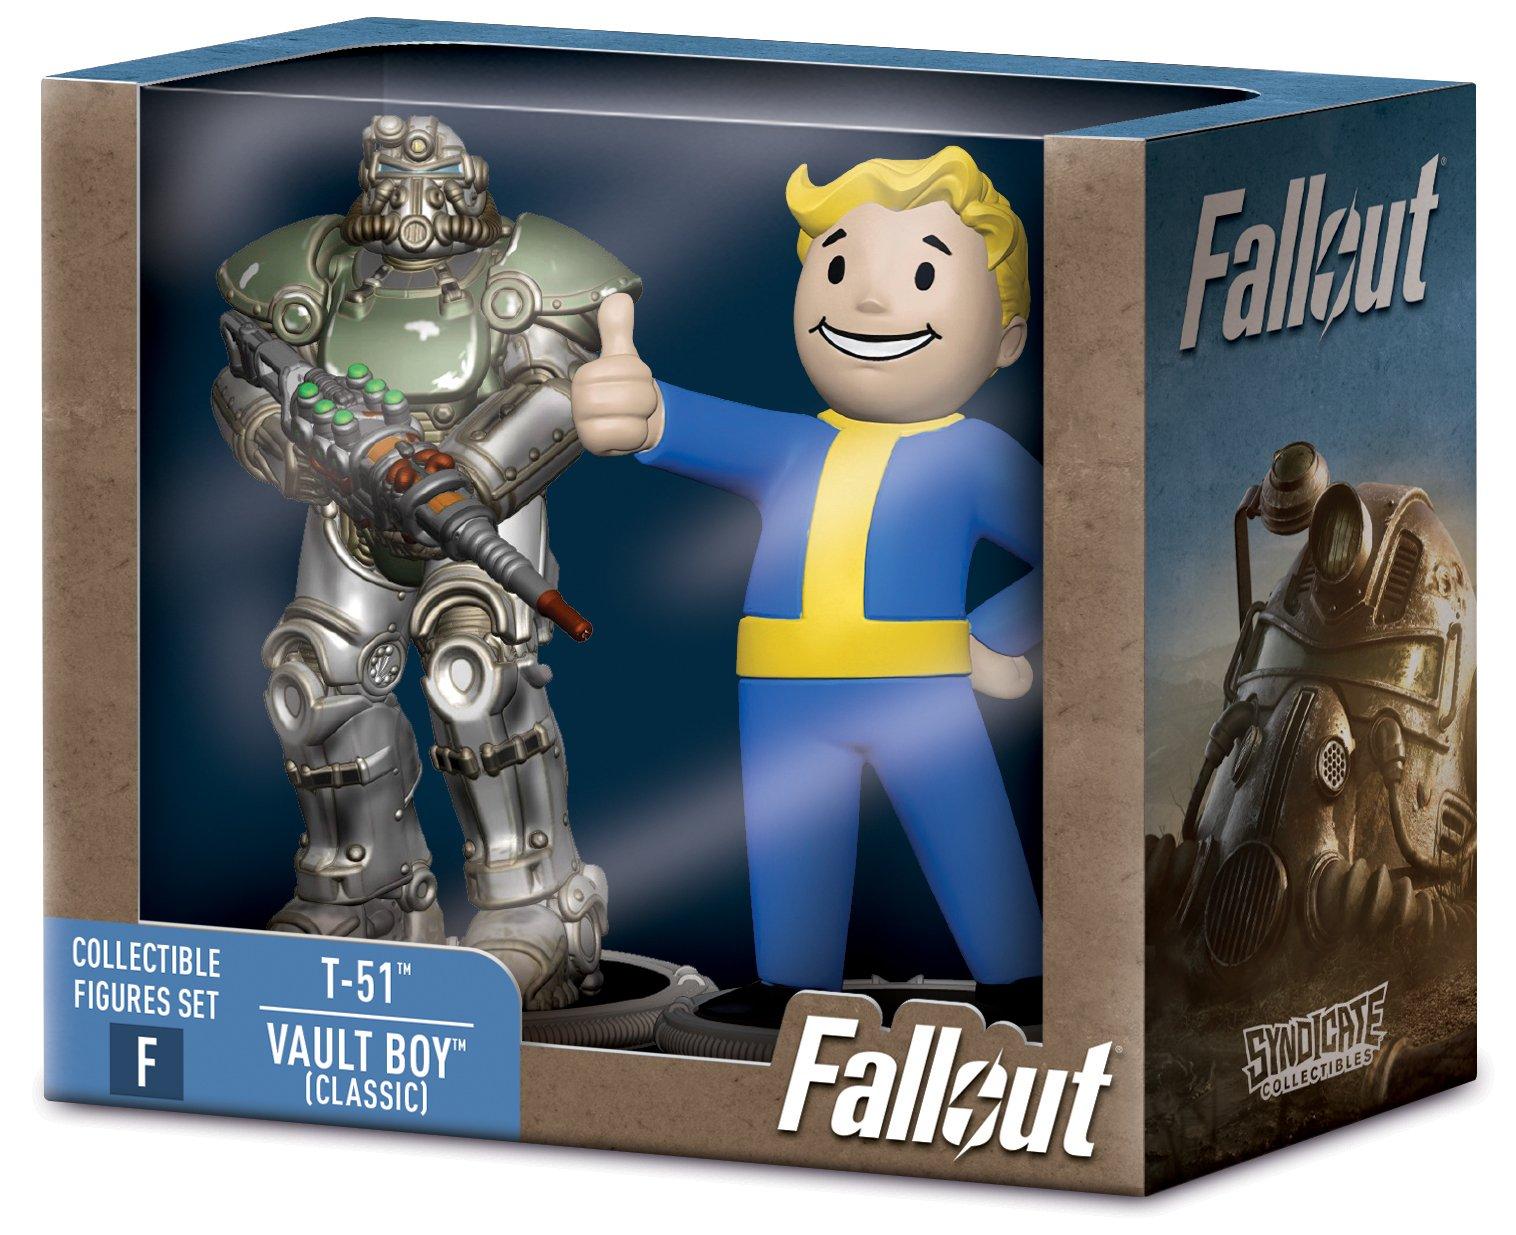 Fallout T-51 and Vault Boy (Classic) (Build-A-Figure - Deathclaw) 3-in Action Figure Set